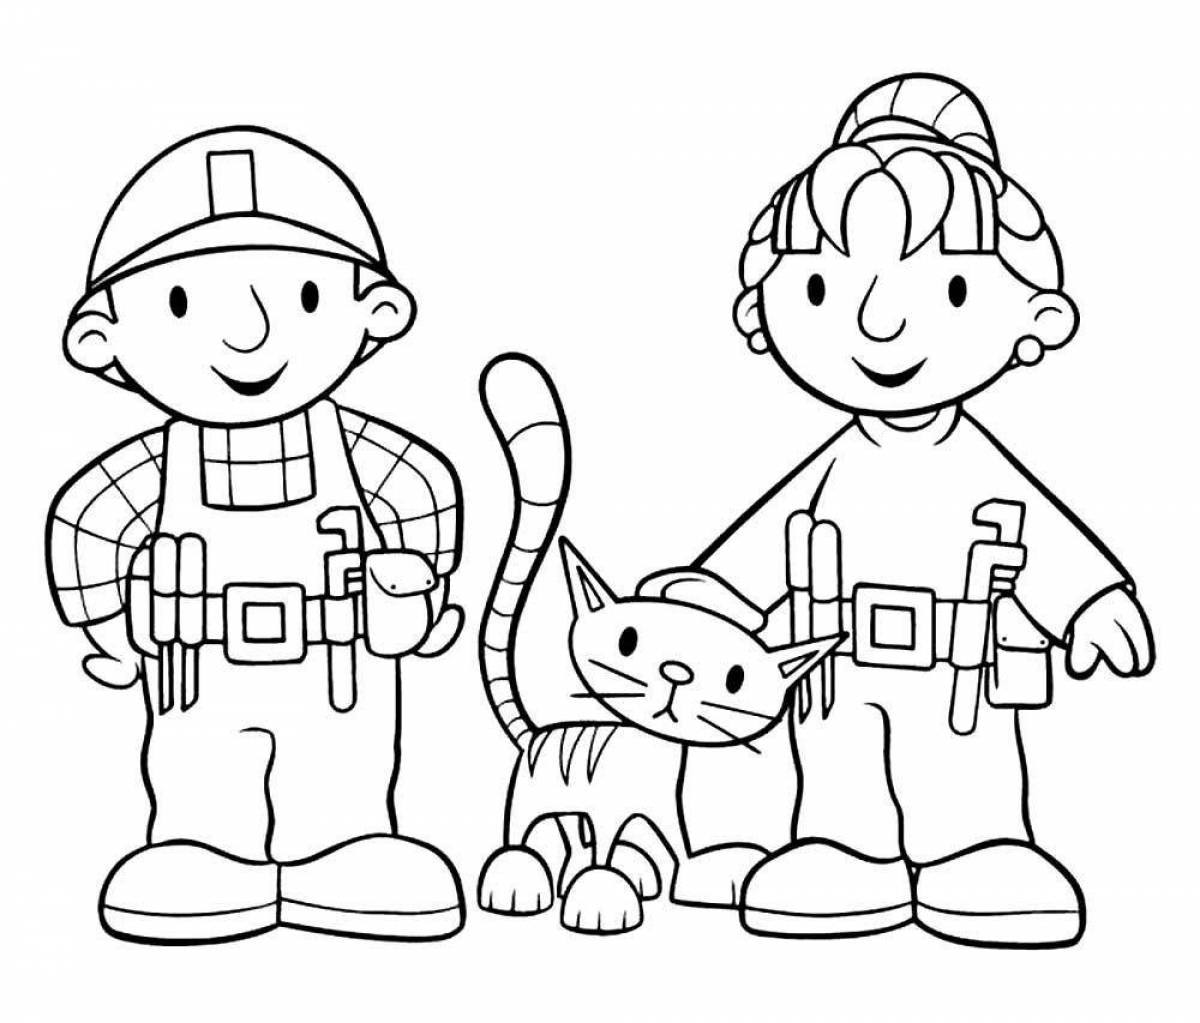 A fun builder coloring book for kids